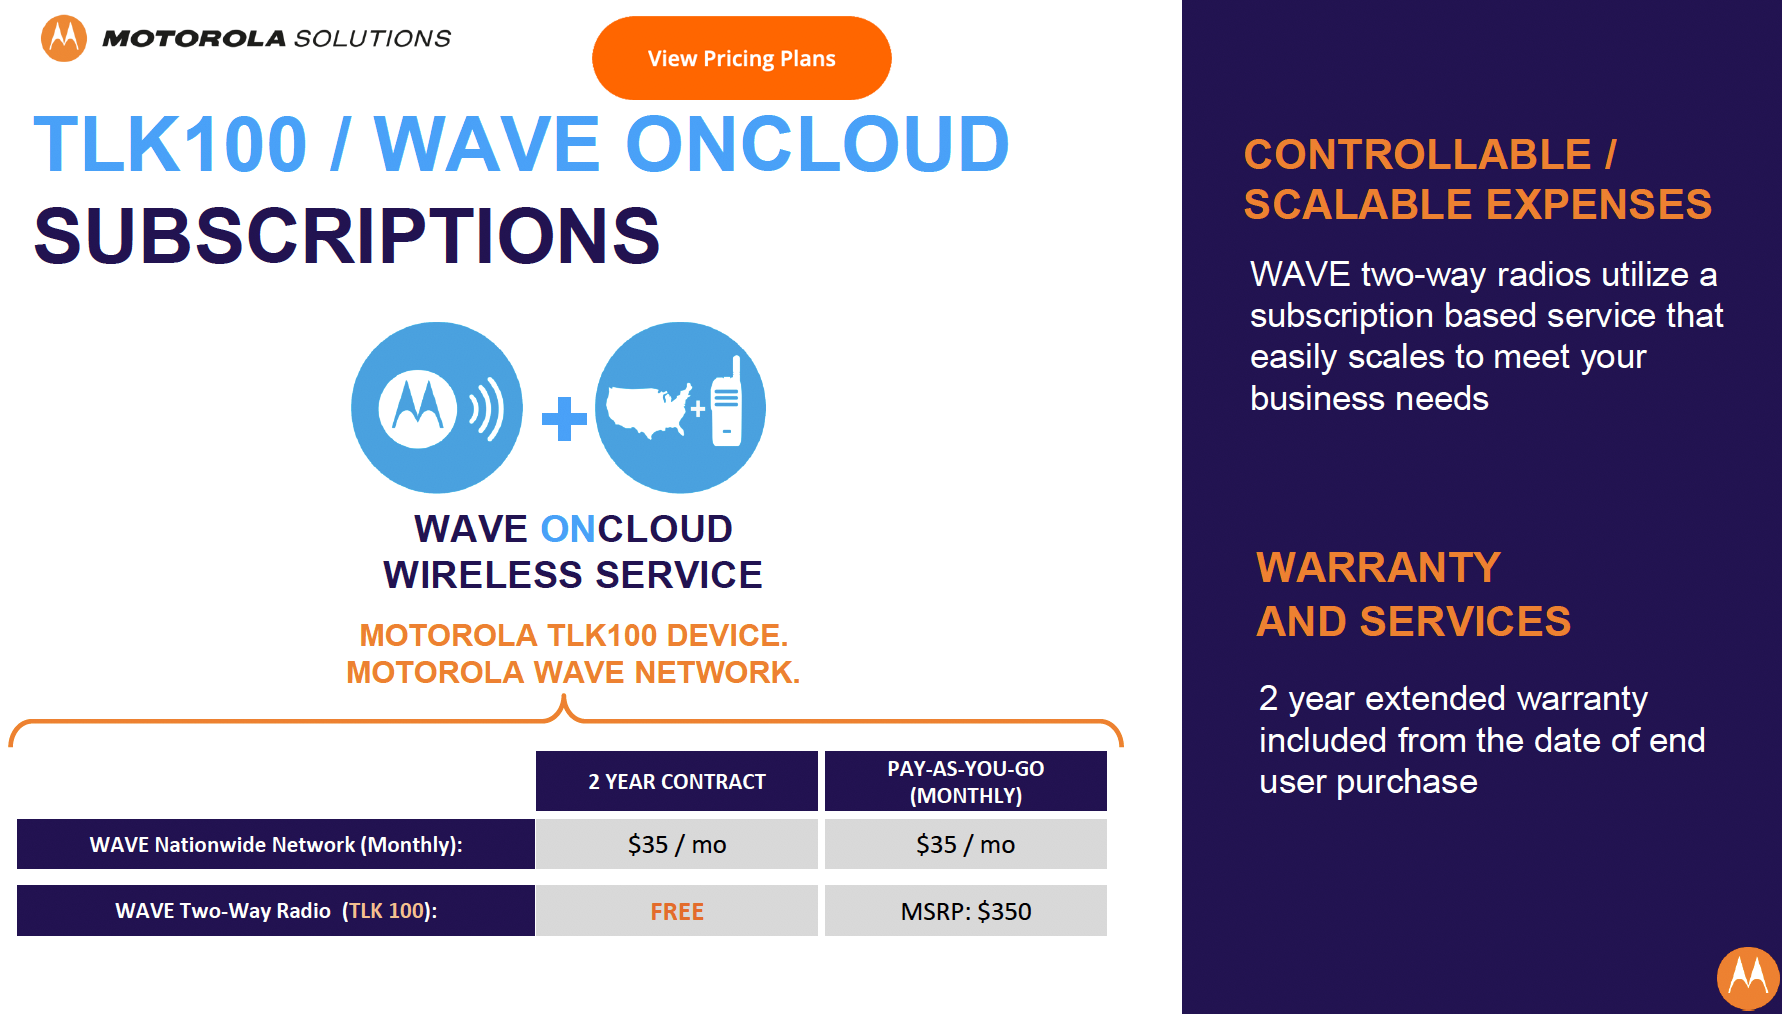 Motorola TLK100 Wave OnCloud Using 4G LTE WiFi Two Way Radio with Nationwide Coverage Monthly Service Fee Required - 4